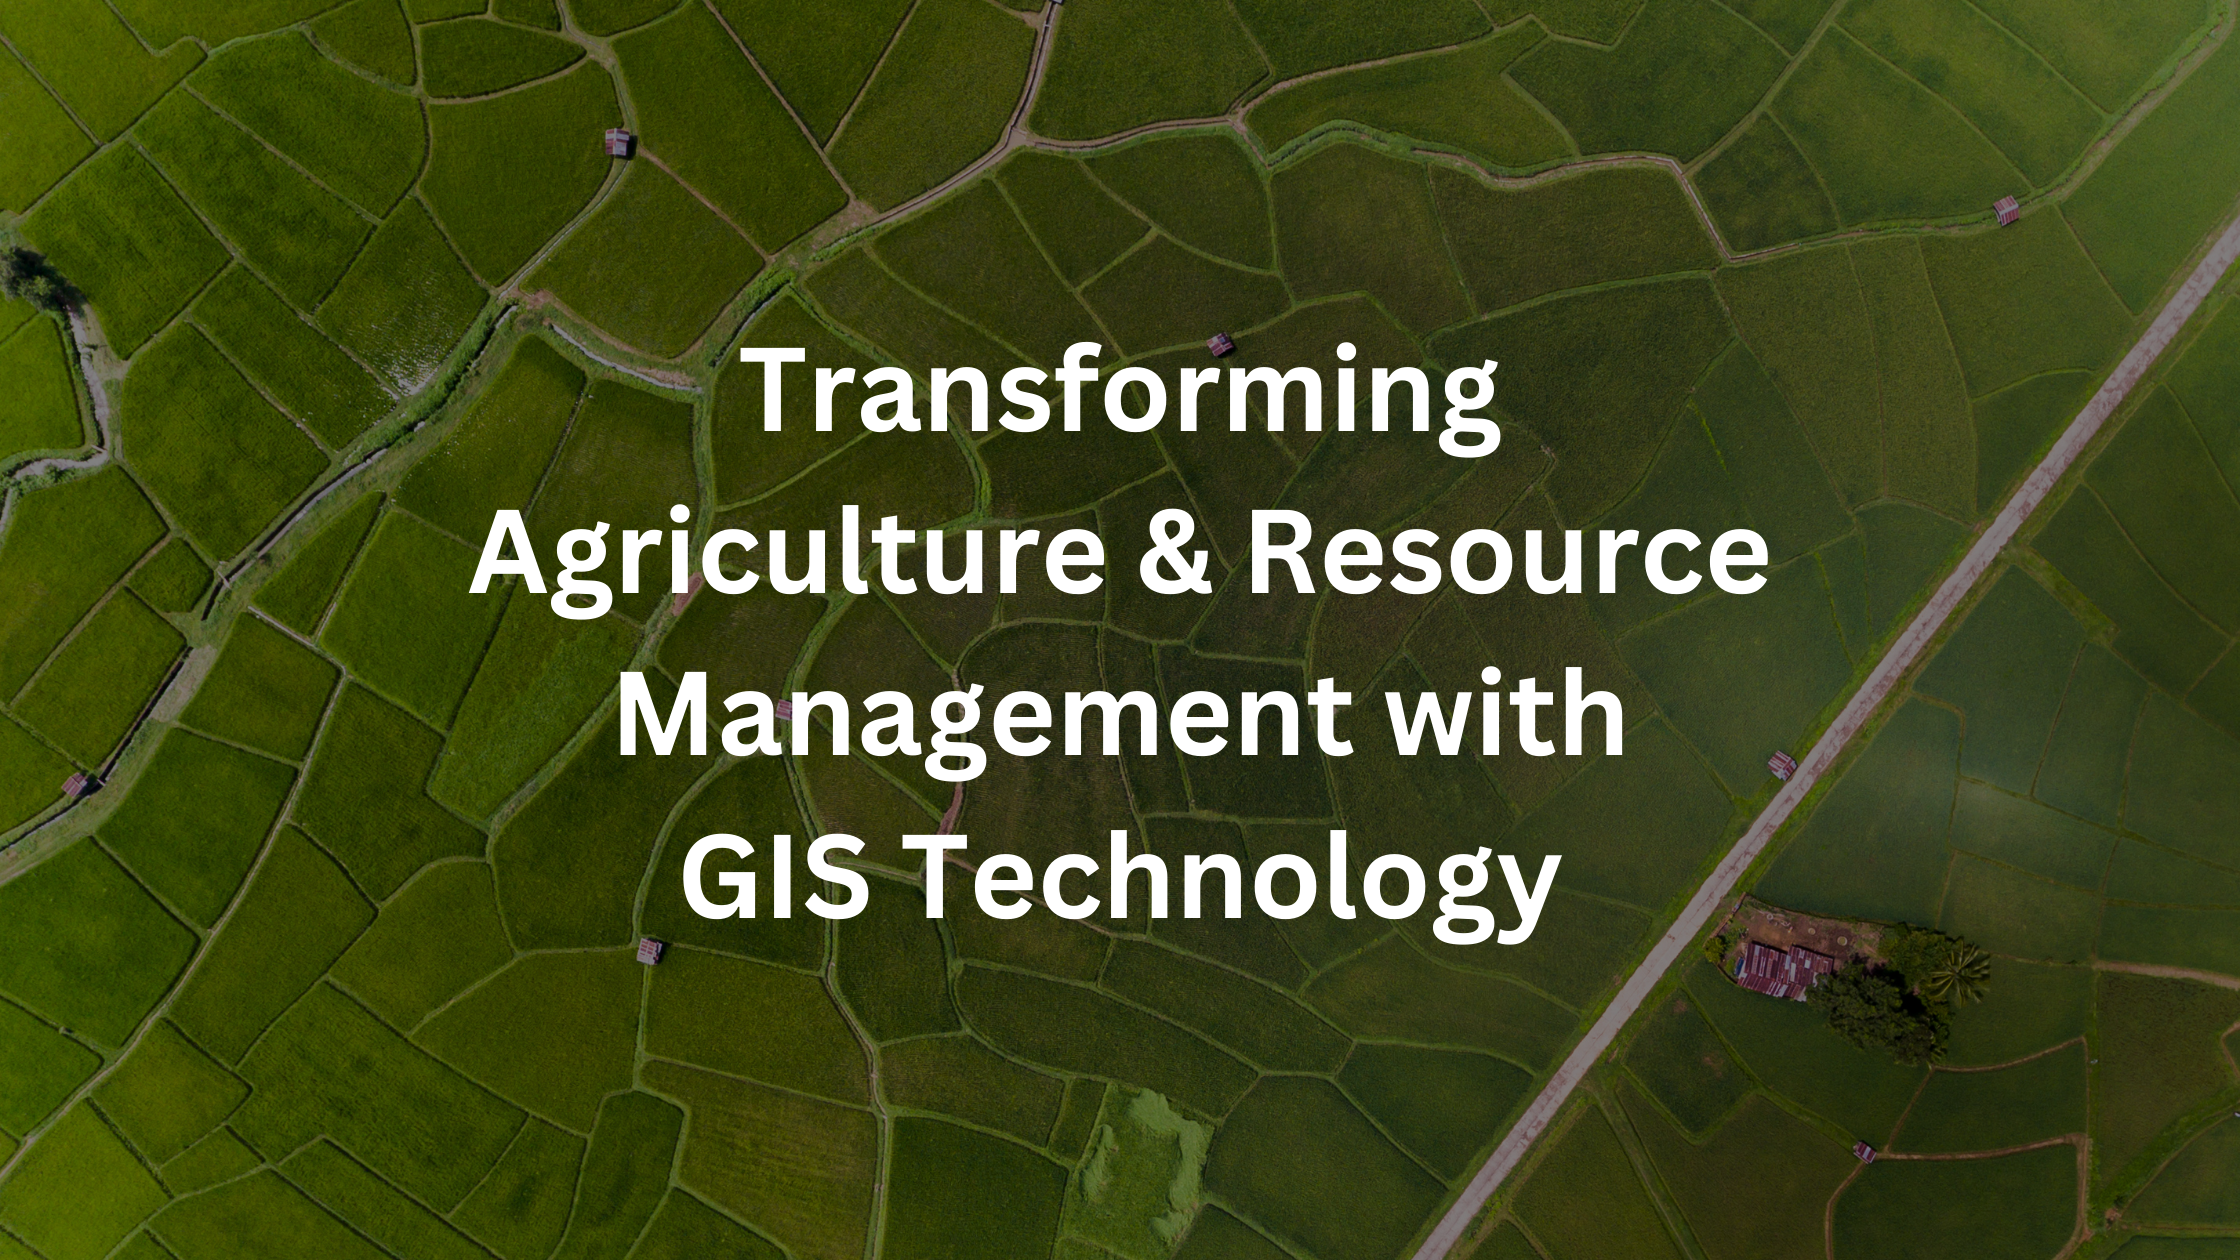 Role of GIS in Agriculture and Natural Resource Management